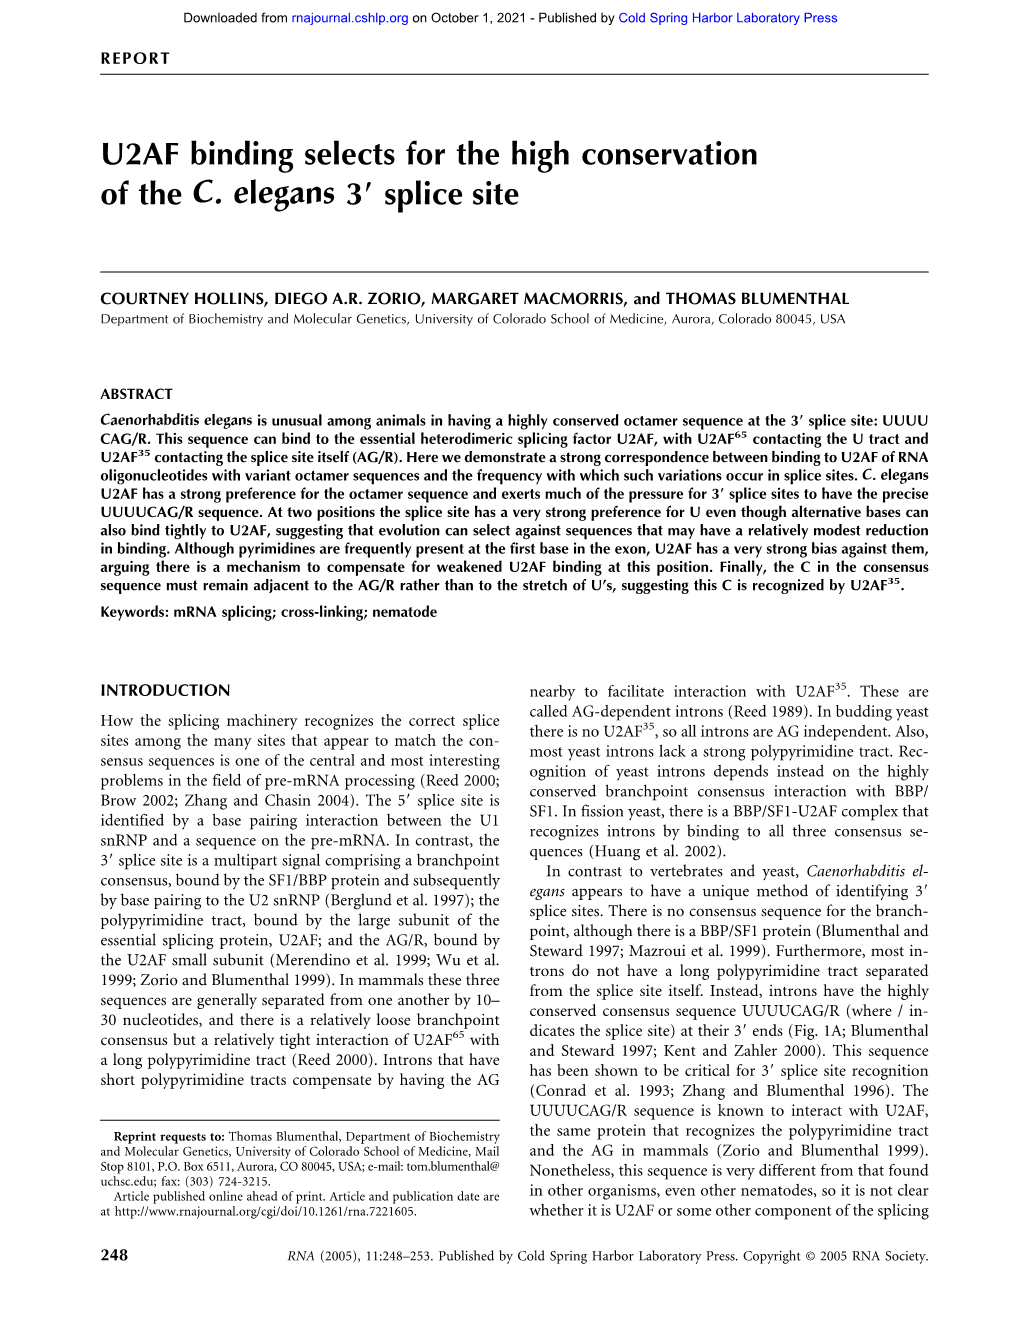 U2AF Binding Selects for the High Conservation of the C. Elegans 3؅ Splice Site